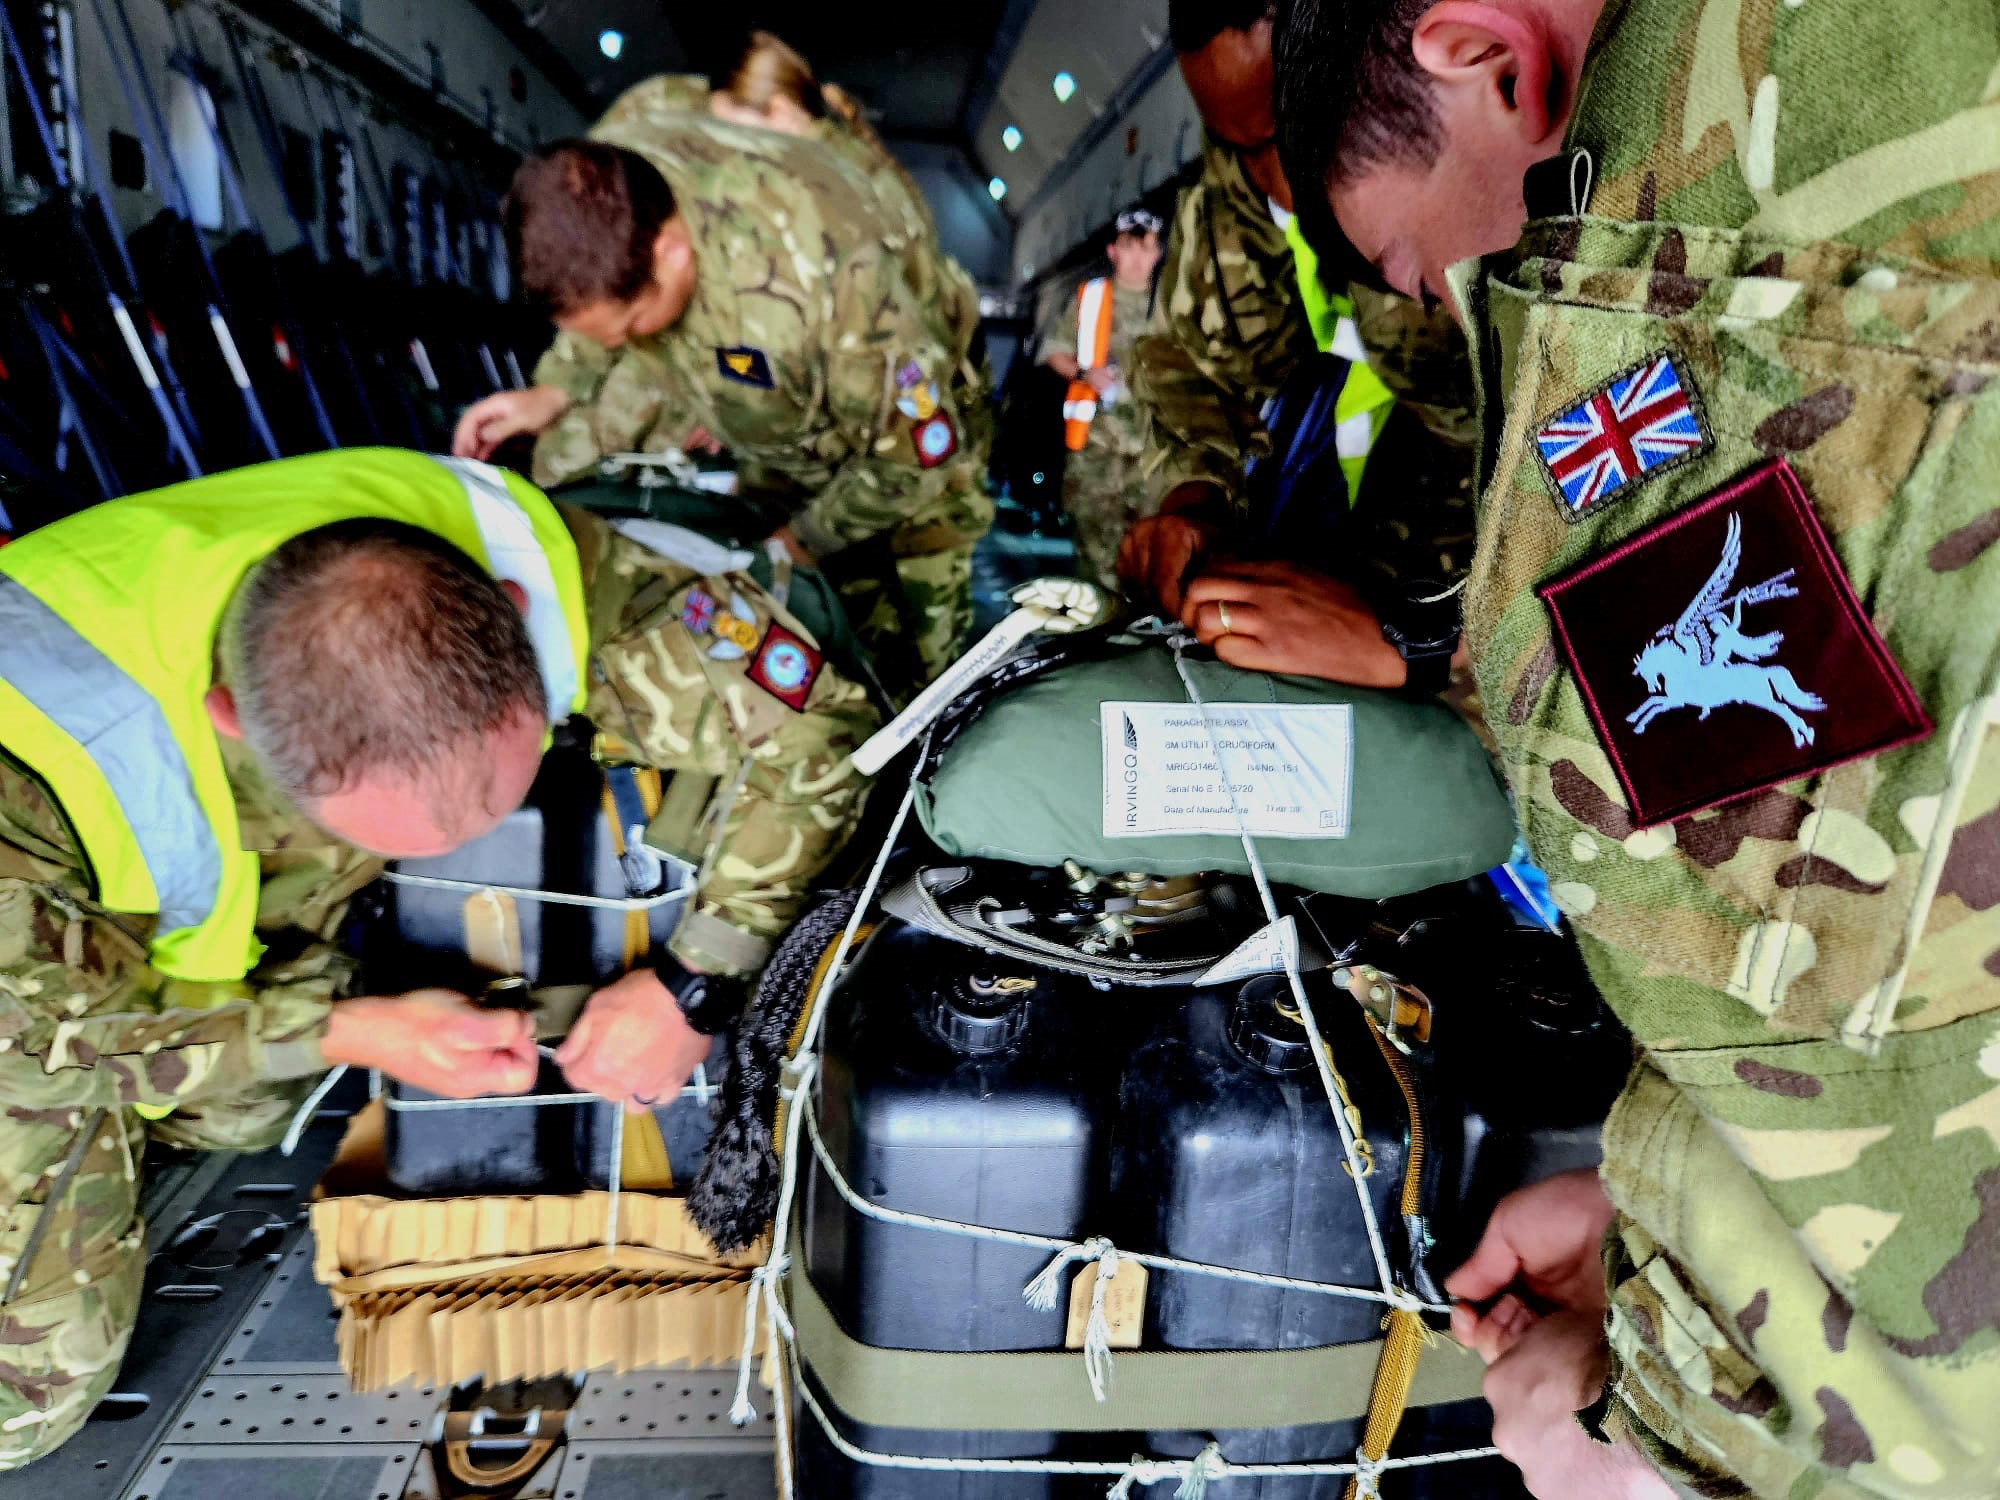 The Air Mobility Force have been developing the skillsets of frontline Atlas A400M crews on Exercise Venture Spirit in Scotland.